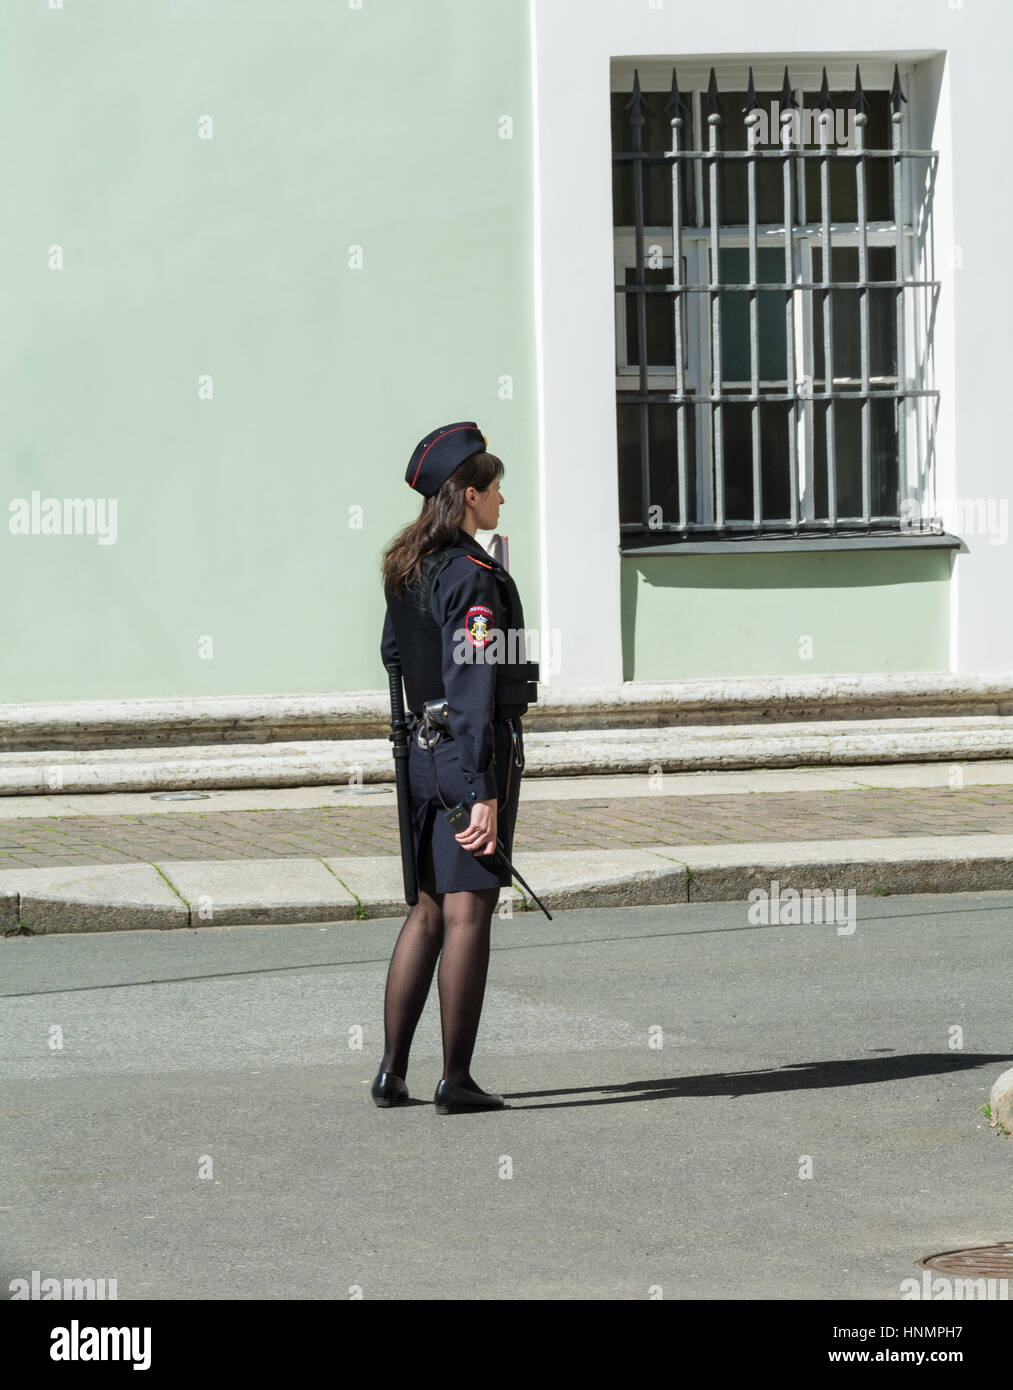 ST. PETERSBURG, RUSSIA - JULY 10, 2016: girl in russian police uniform stands against the wall of the Hermitage, St. Petersburg, Russia Stock Photo